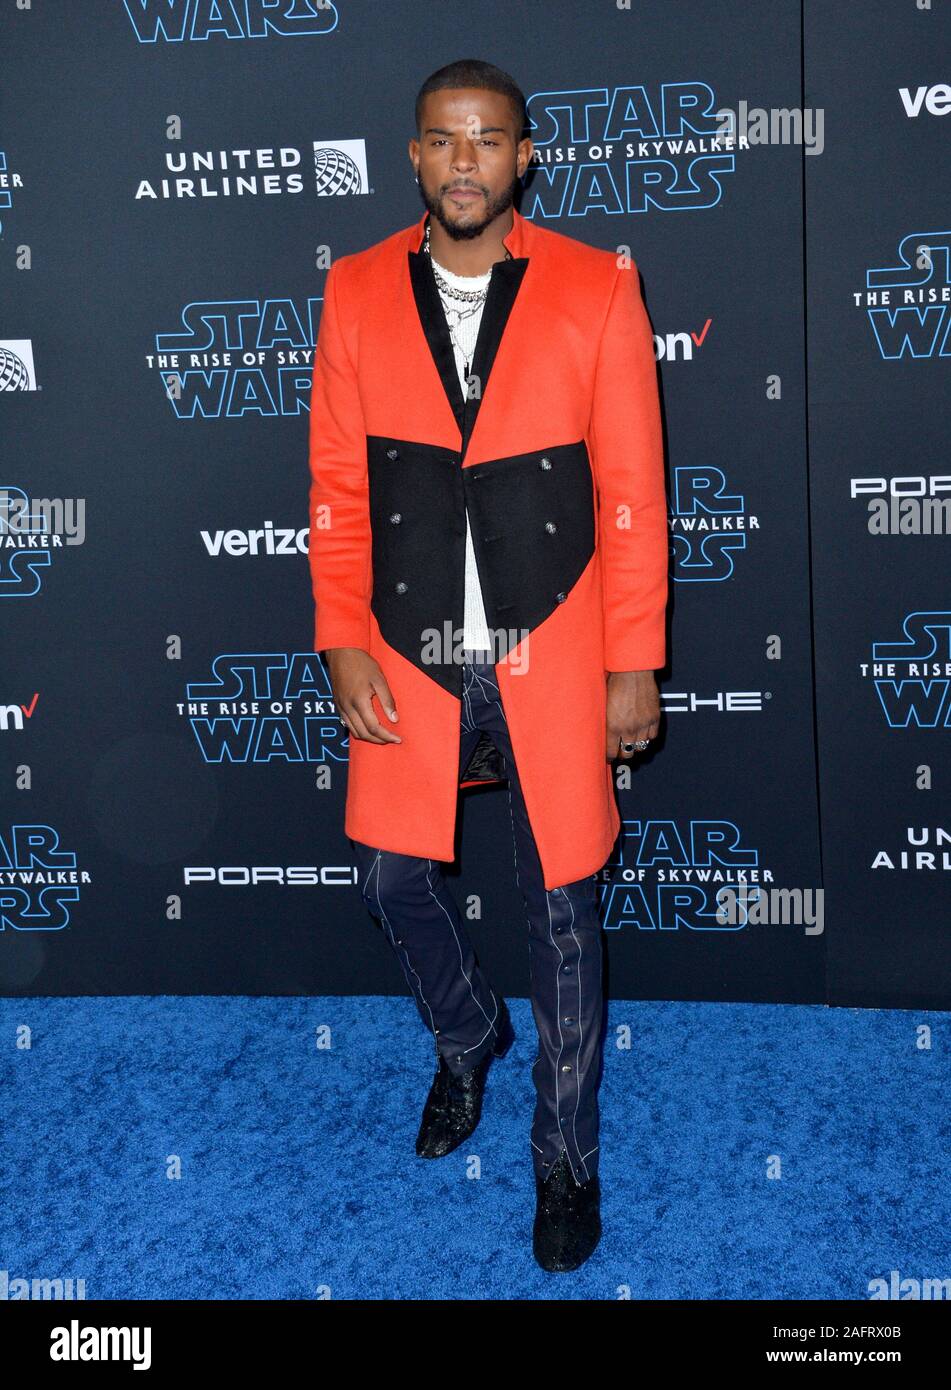 Los Angeles, USA. 16th Dec, 2019. LOS ANGELES, USA. December 16, 2019: Trevor Jackson at the world premiere of 'Star Wars: The Rise of Skywalker' at the El Capitan Theatre. Picture Credit: Paul Smith/Alamy Live News Stock Photo